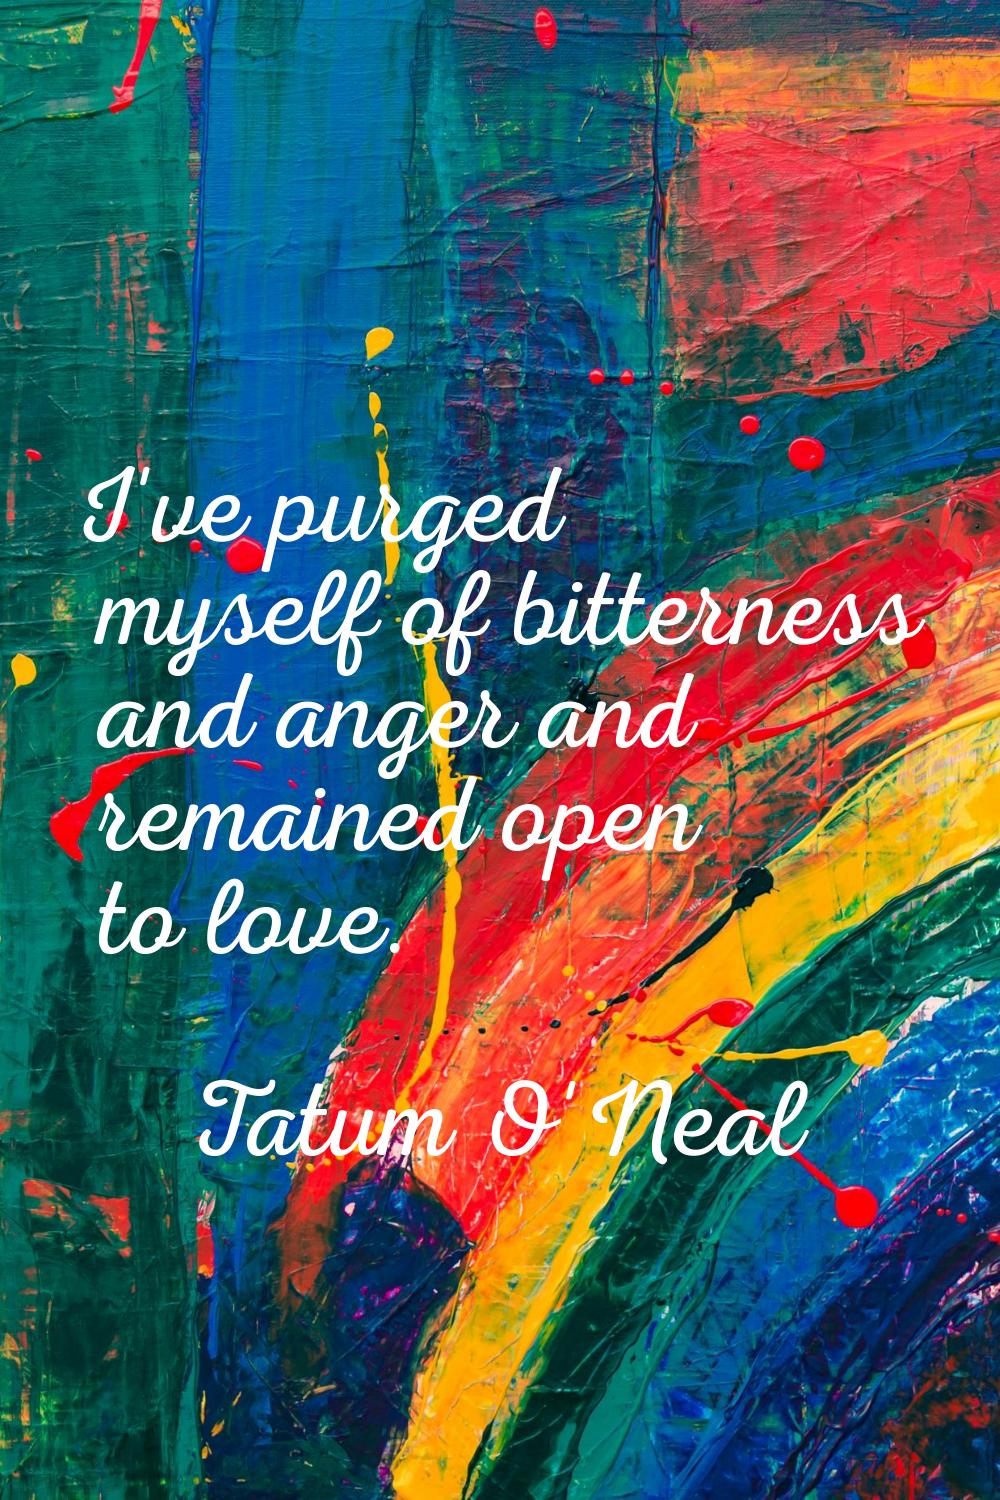 I've purged myself of bitterness and anger and remained open to love.